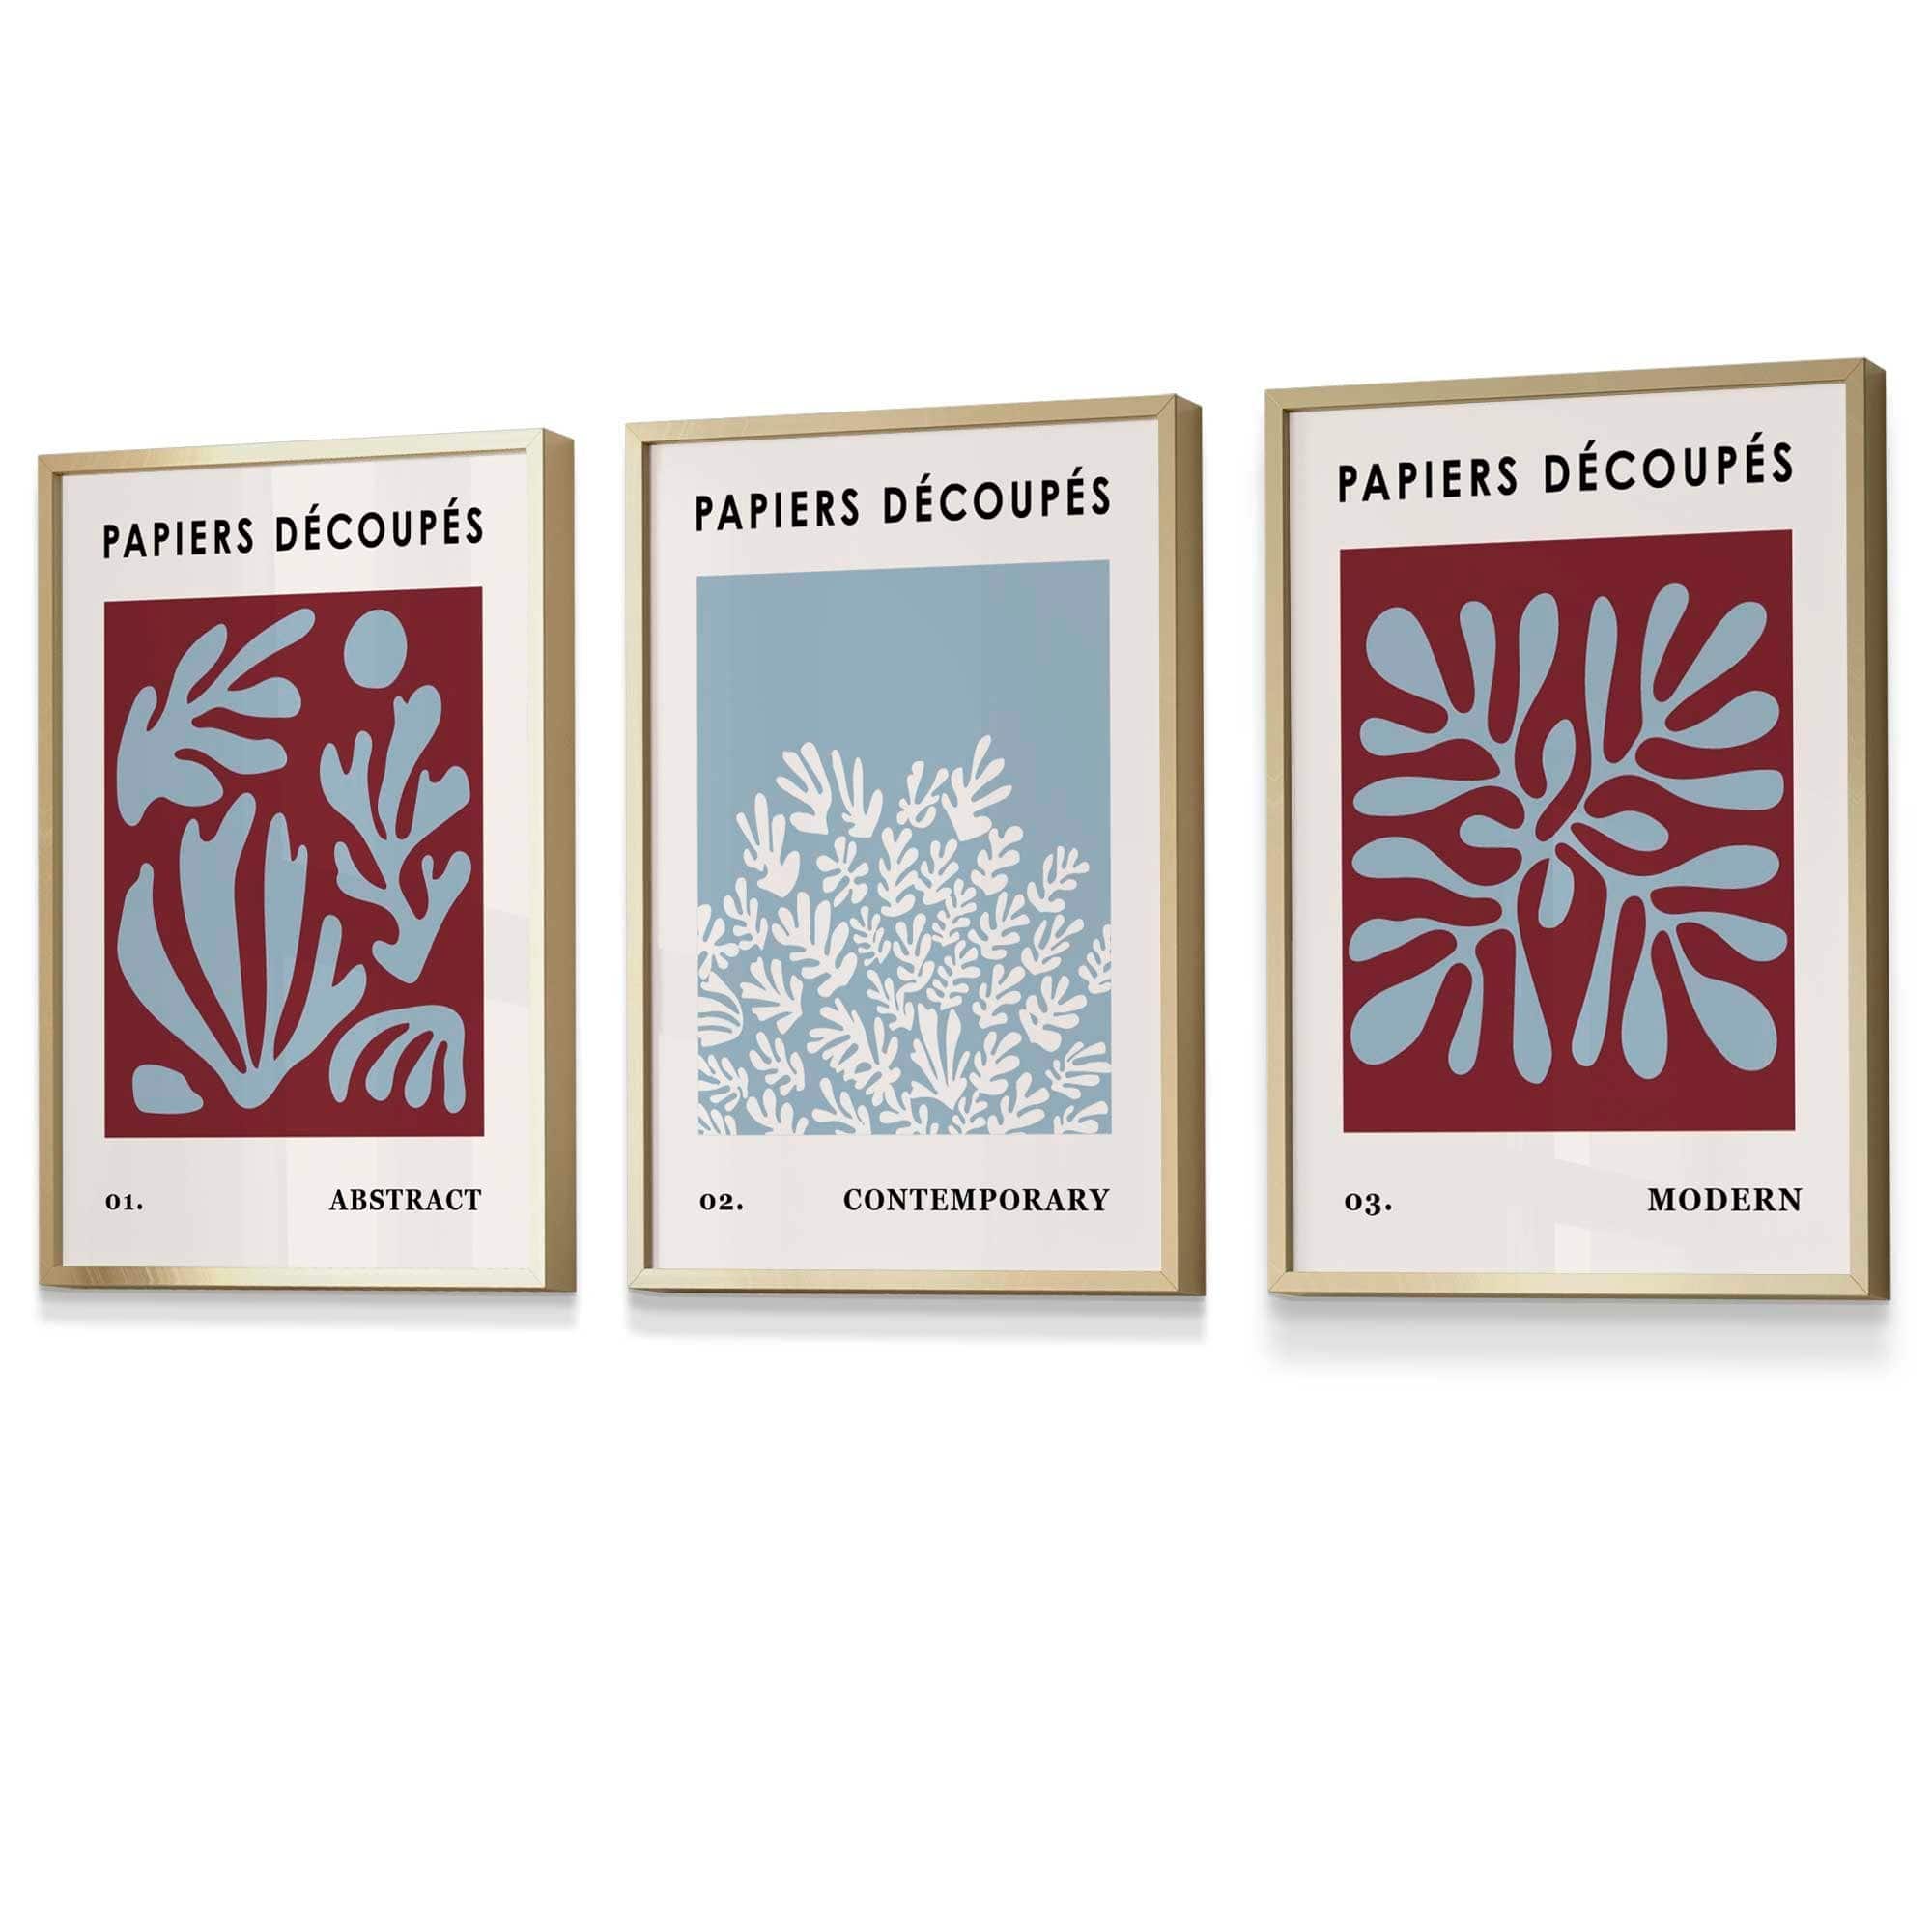 Matisse Floral Set of 3 FRAMED Wall Art Prints in Purple and Blue with Ivory | Artze Wall Art UK